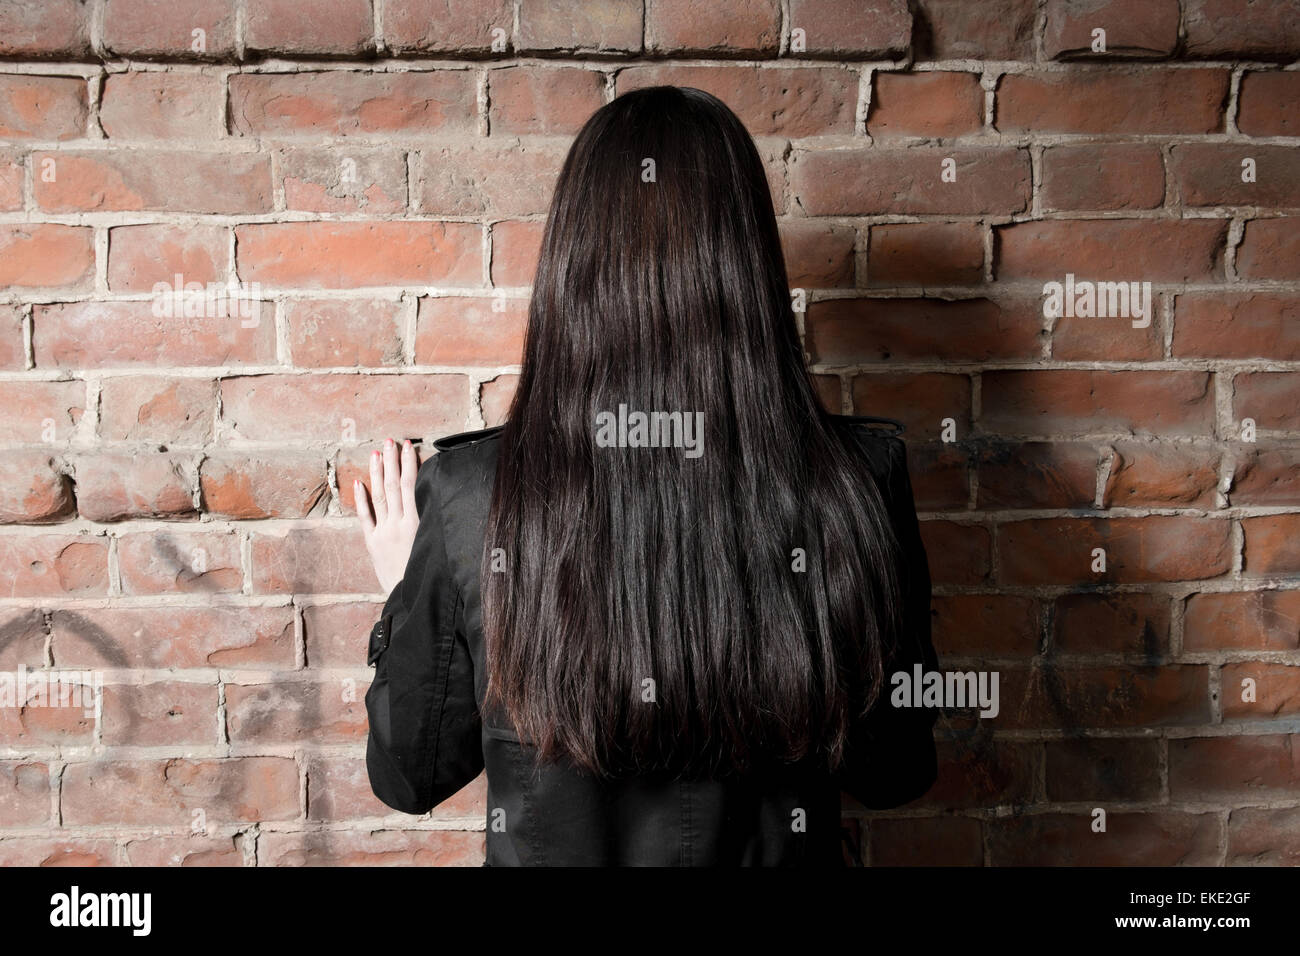 Rear view of a woman with long brown hair against red brick background Stock Photo